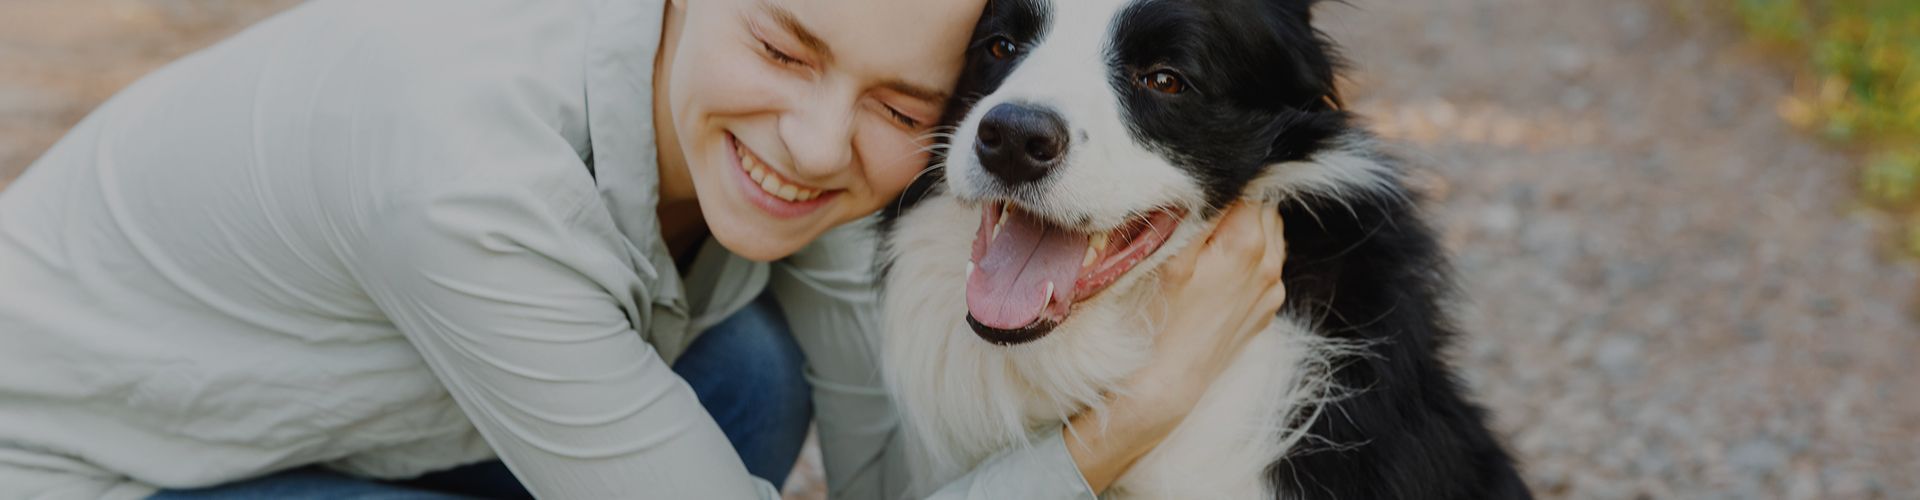 smiling woman hugging happy border collie dog